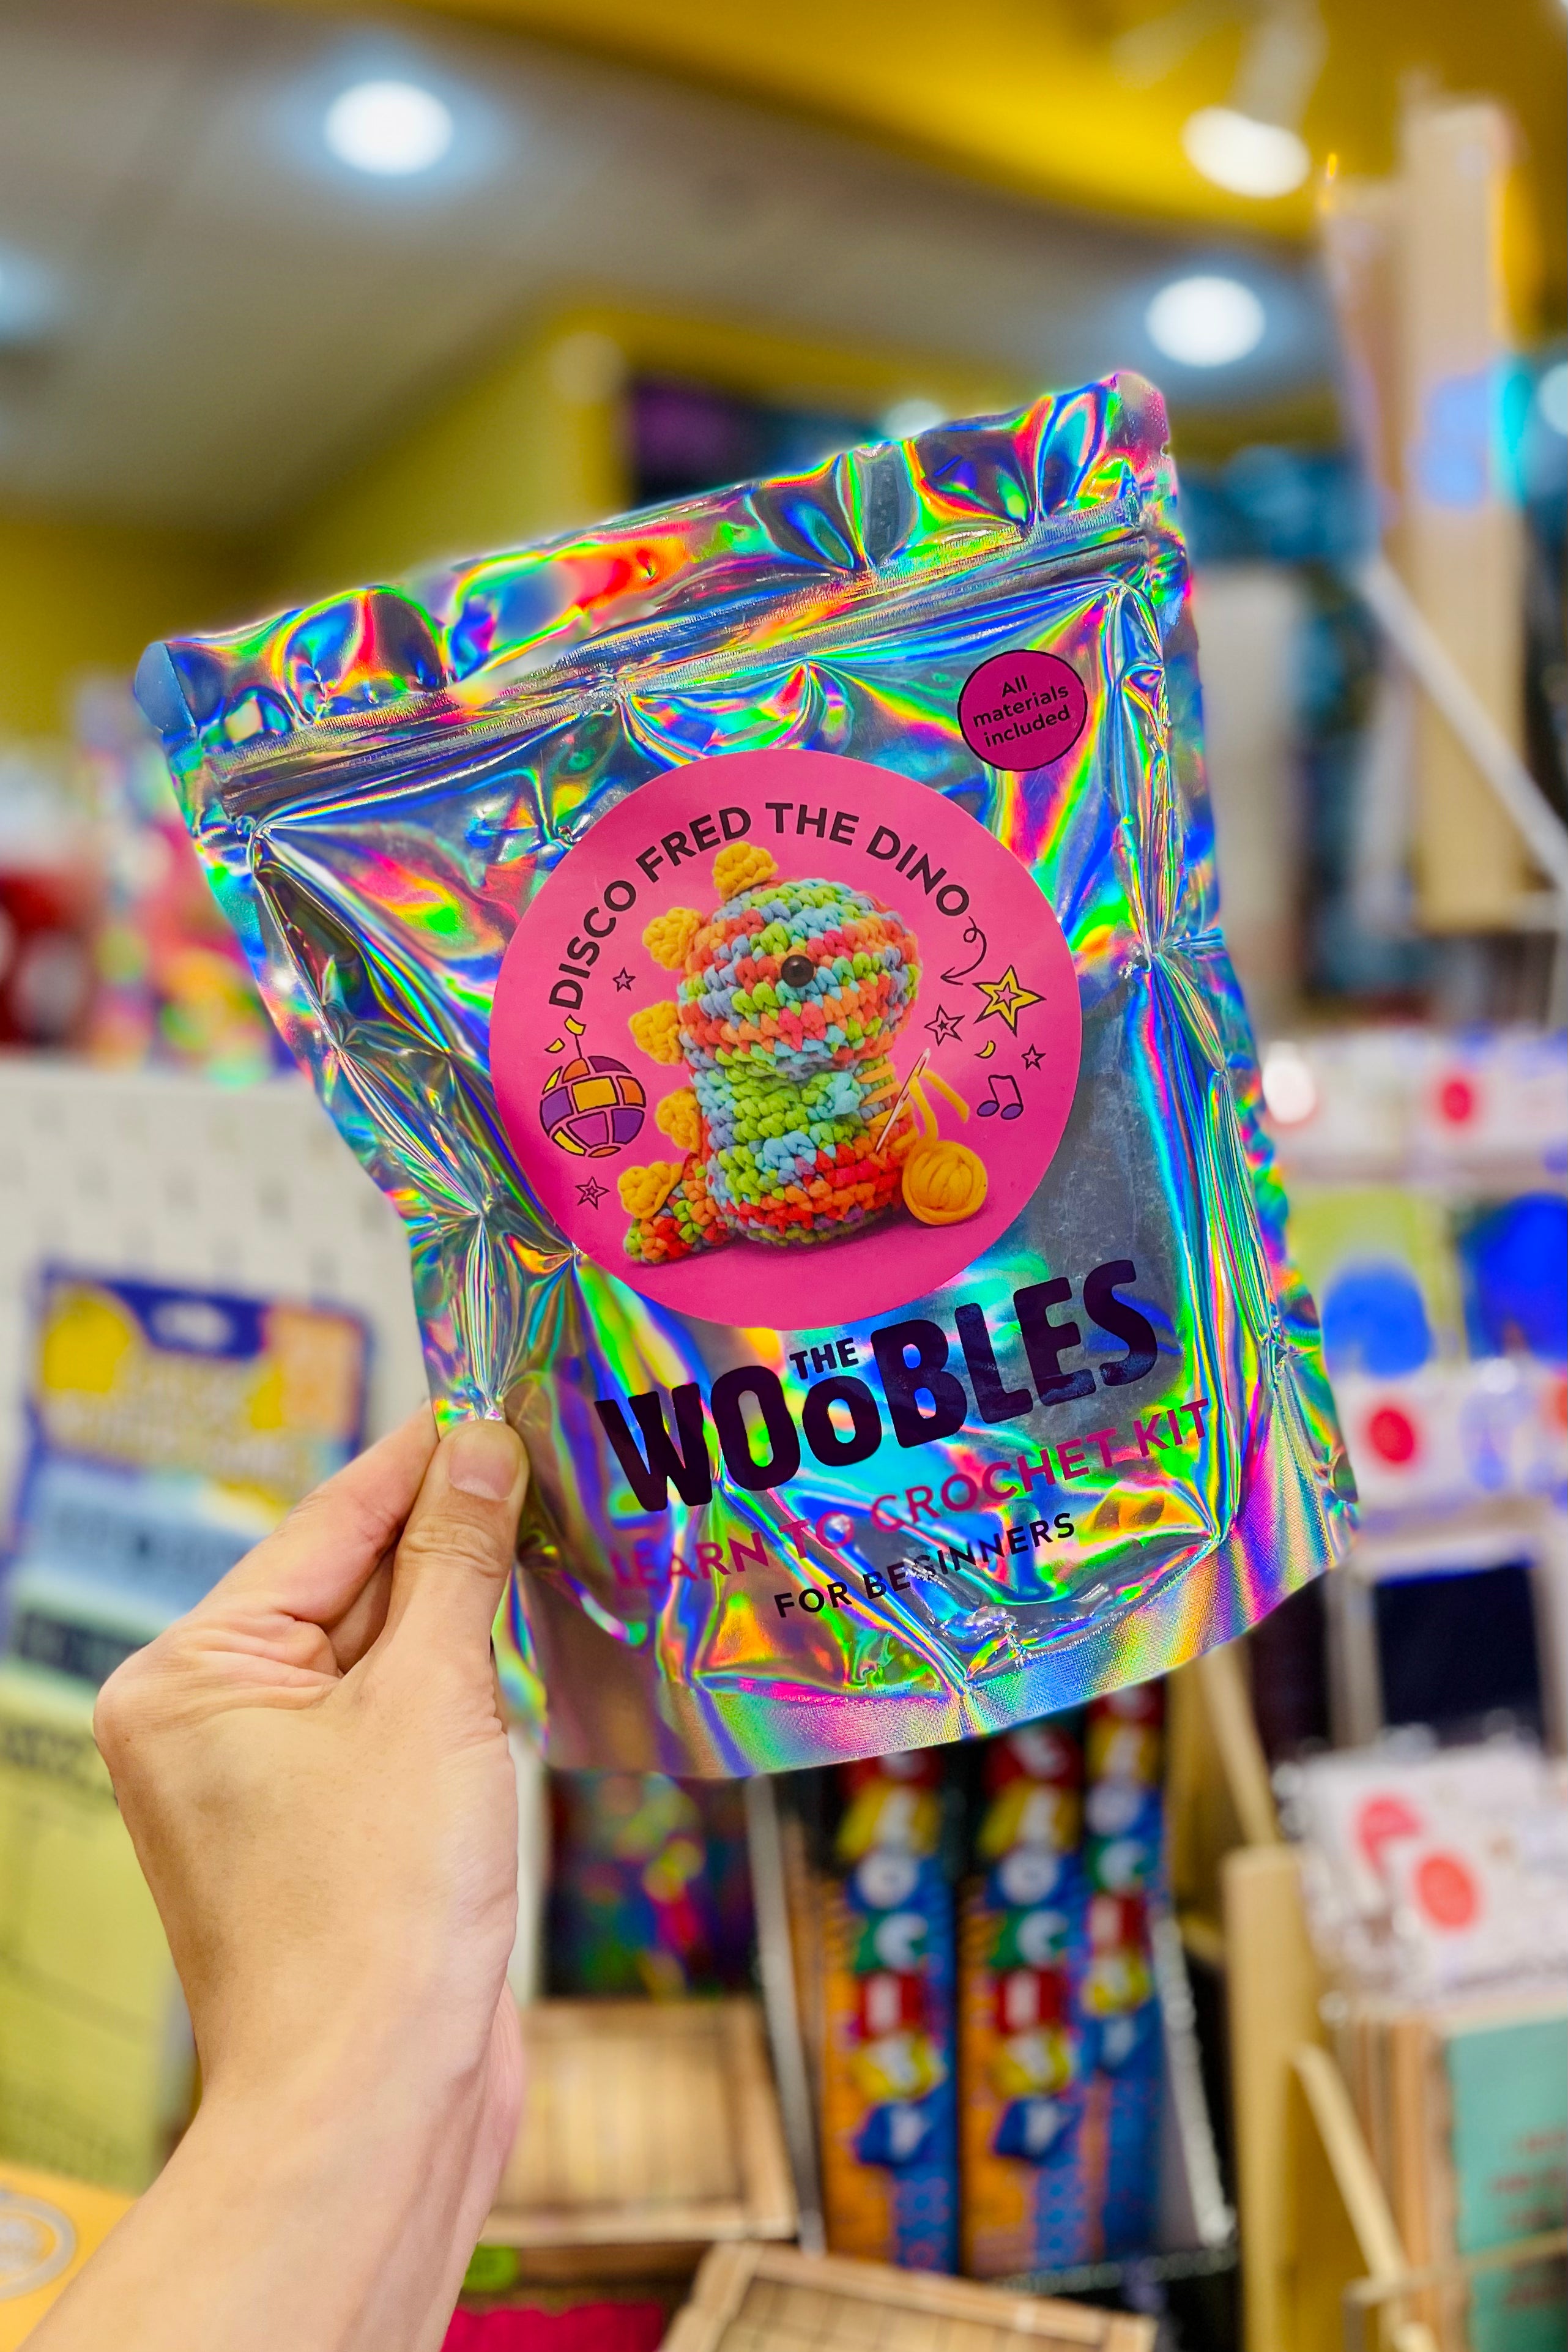 Woobles- Fred the Dinosaur Kit – Candy Skein